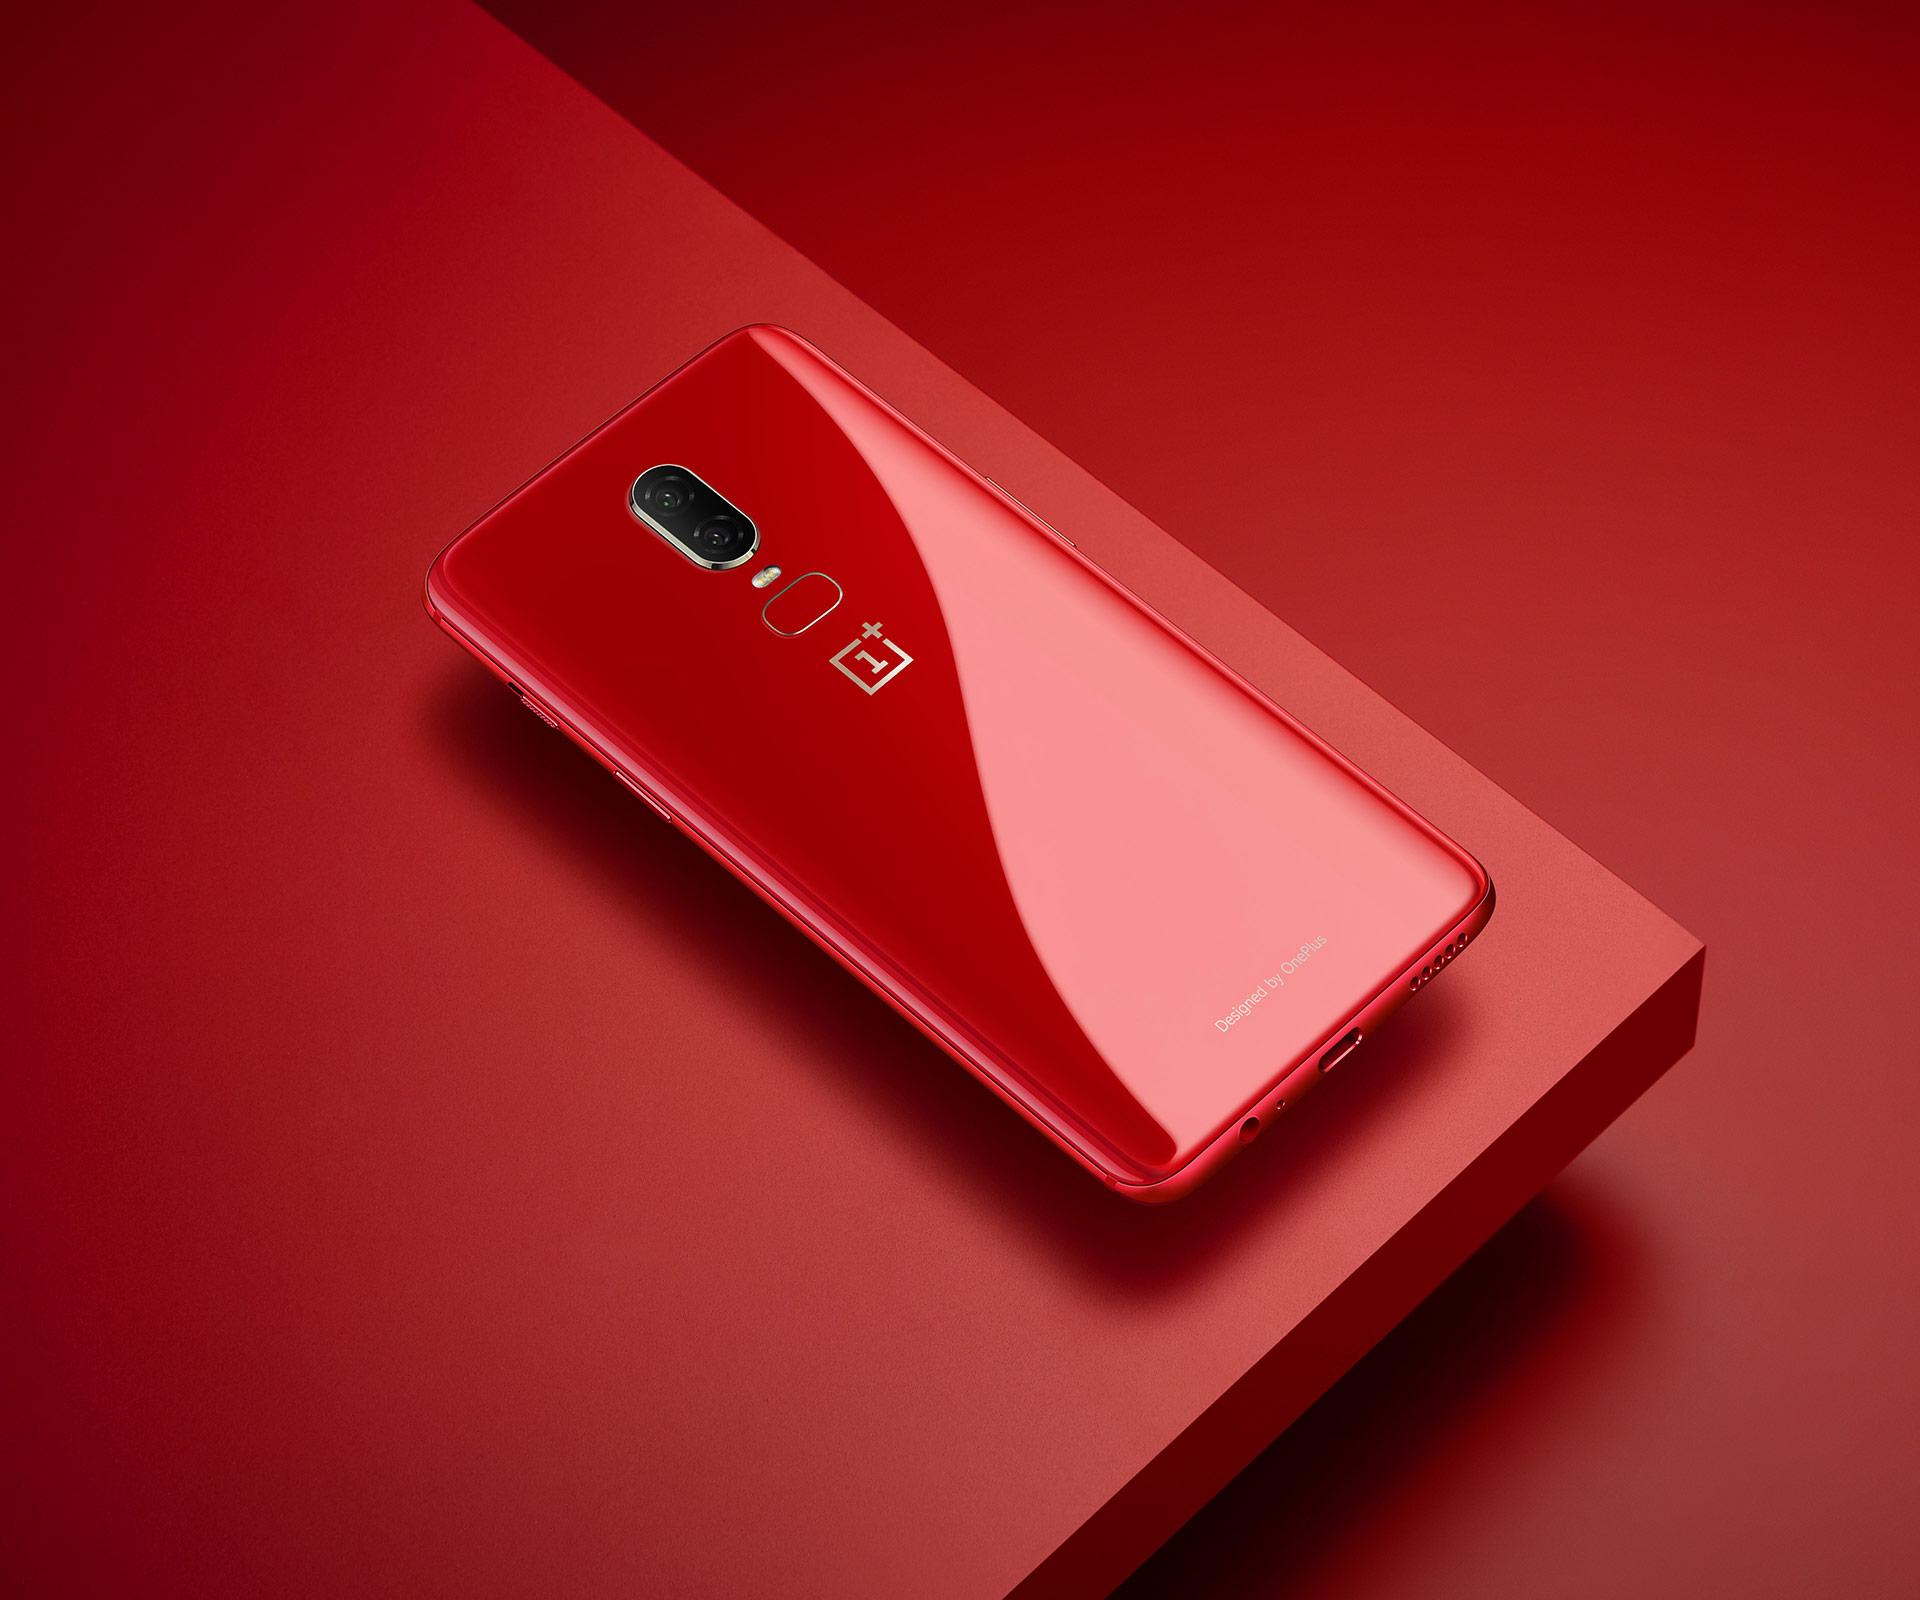 Flaunt Your Style with OnePlus 6 Red & Silk White Edition